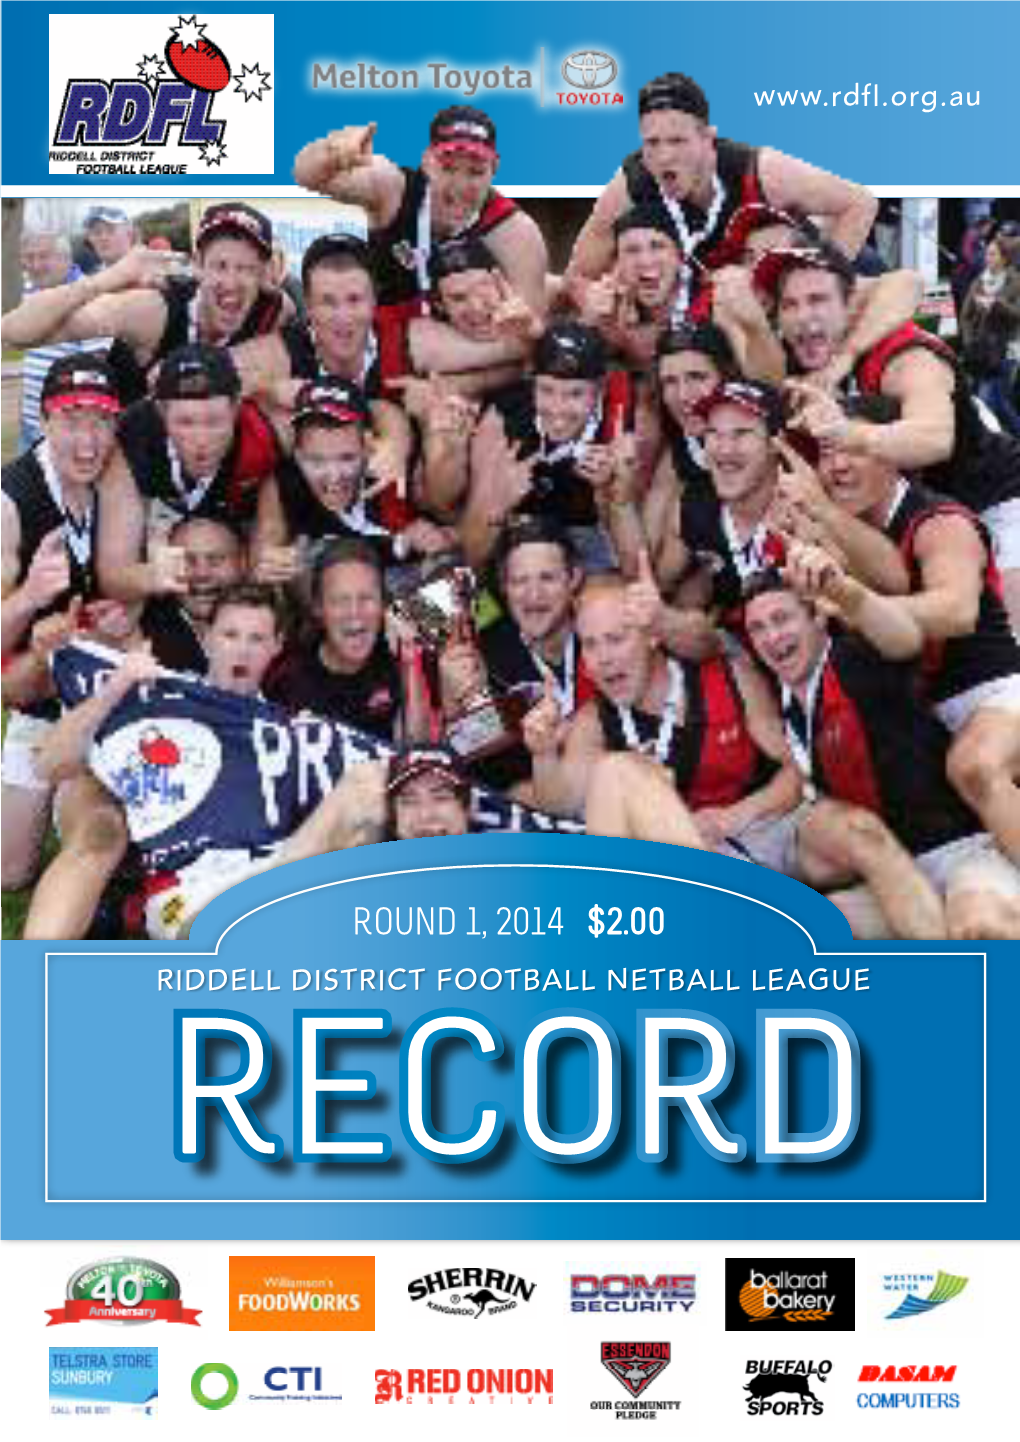 Round 1, 2014 $2.00 RIDDELL DISTRICT FOOTBALL NETBALL LEAGUE RECORD